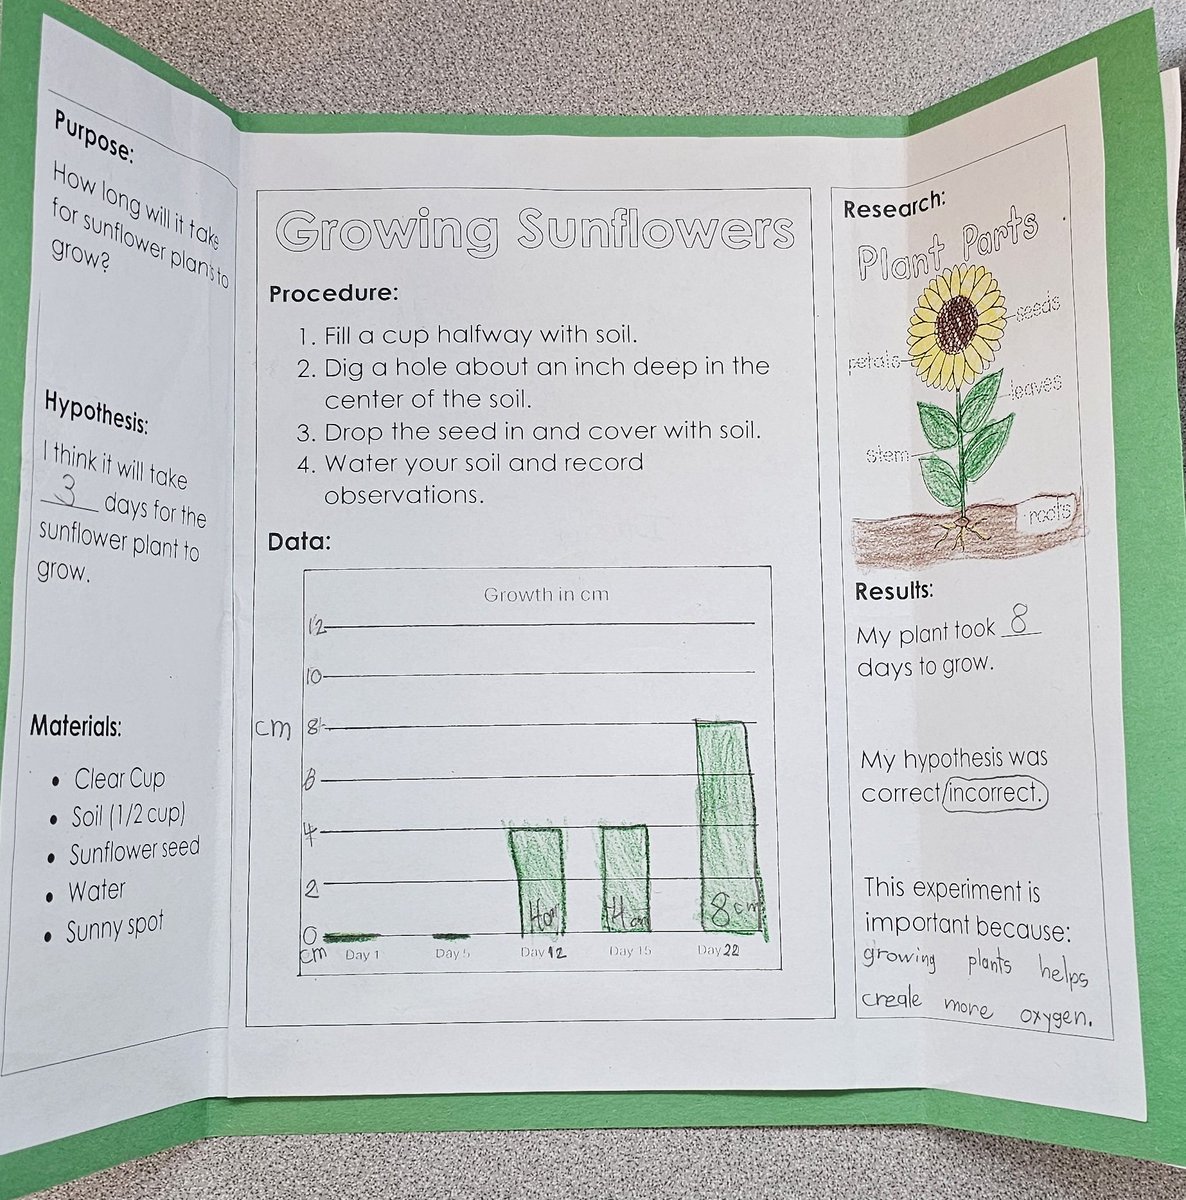 For the past month, my class has grown and taken care of beautiful sunflower plants to give to their moms for Mother's Day 🌻🩷🩷🩷 #CactusMakesPerfect